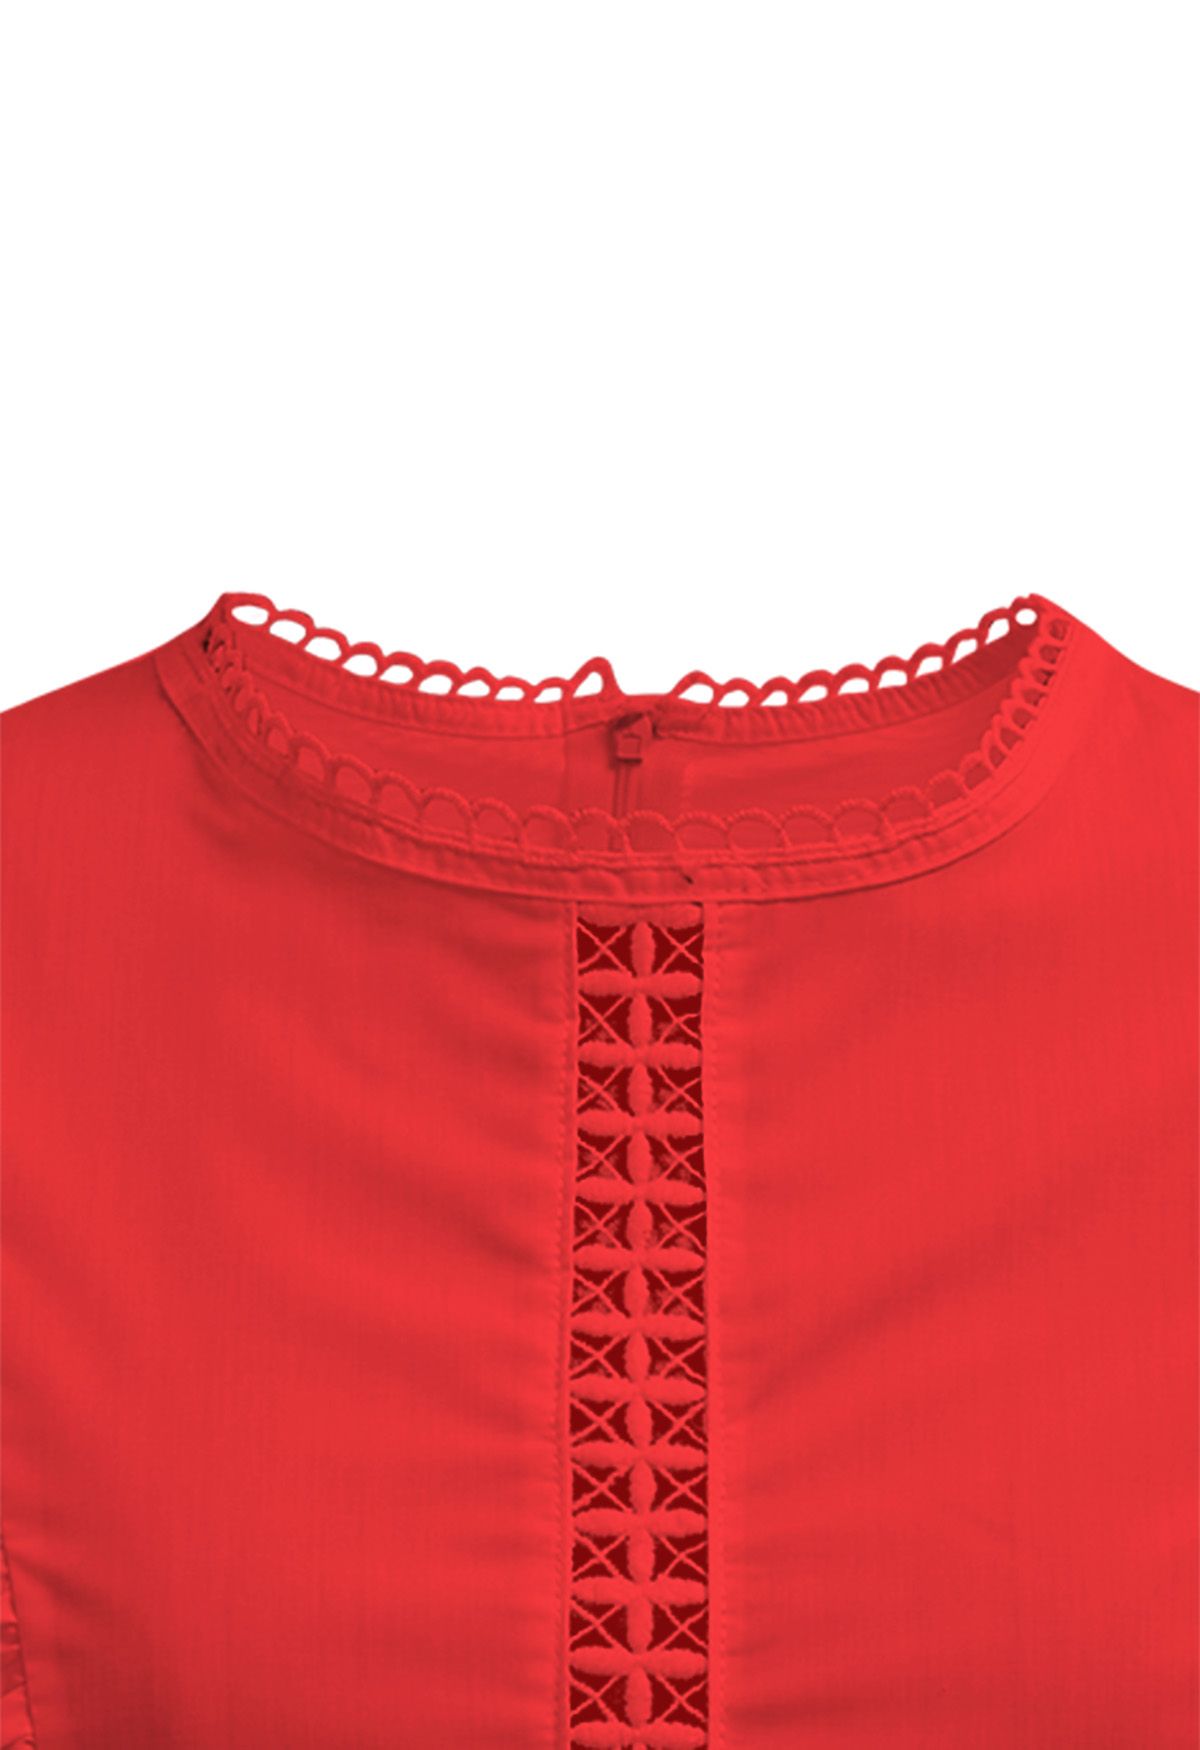 Crochet Trim Sleeveless Cotton Top in Red